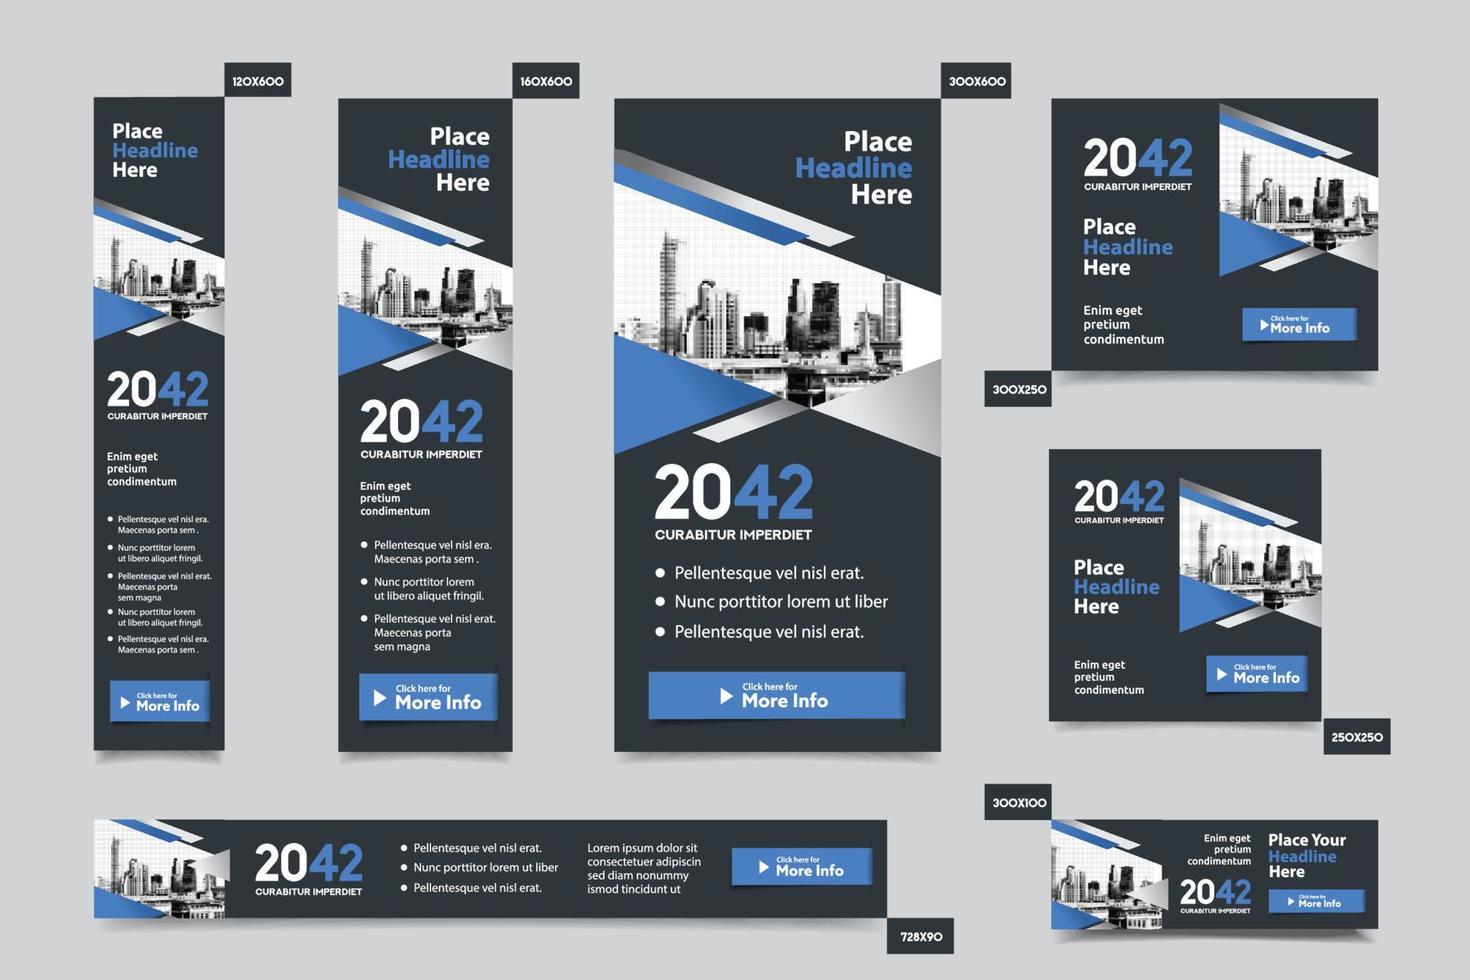 City Background Business Card Design Template. Can be adapt to Brochure, Annual Report, Magazine,Poster, Corporate Presentation, Portfolio, Flyer, Website vector